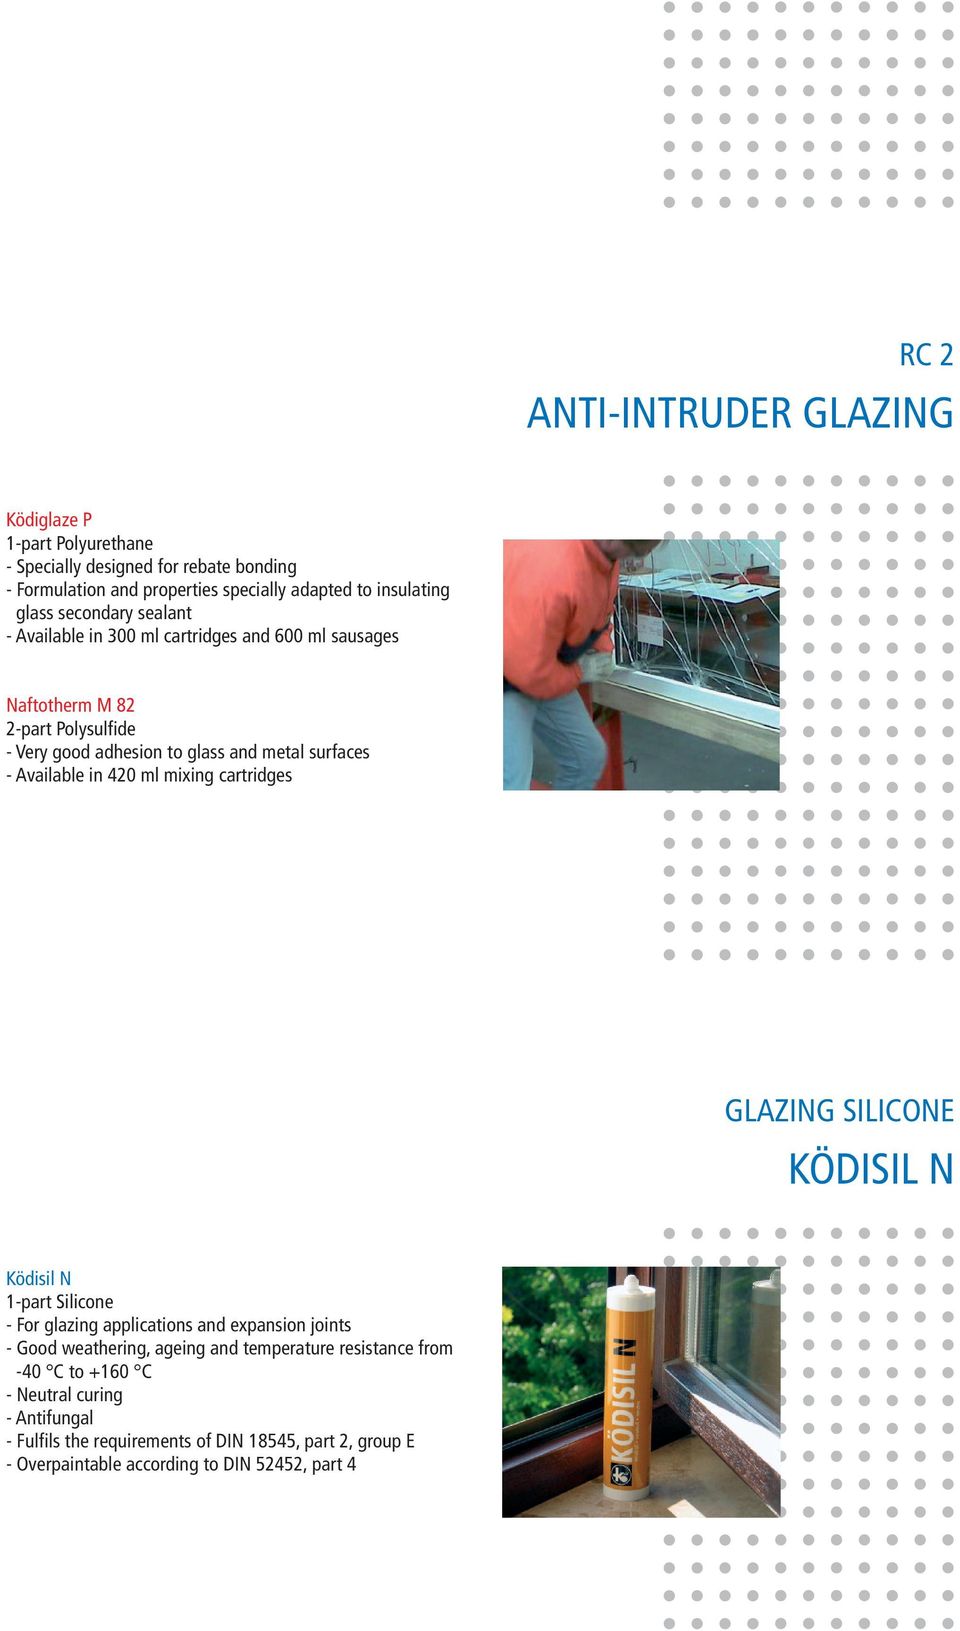 in 420 ml mixing cartridges GLAZING SILICONE KÖDISIL N Ködisil N 1-part Silicone - For glazing applications and expansion joints - Good weathering, ageing and